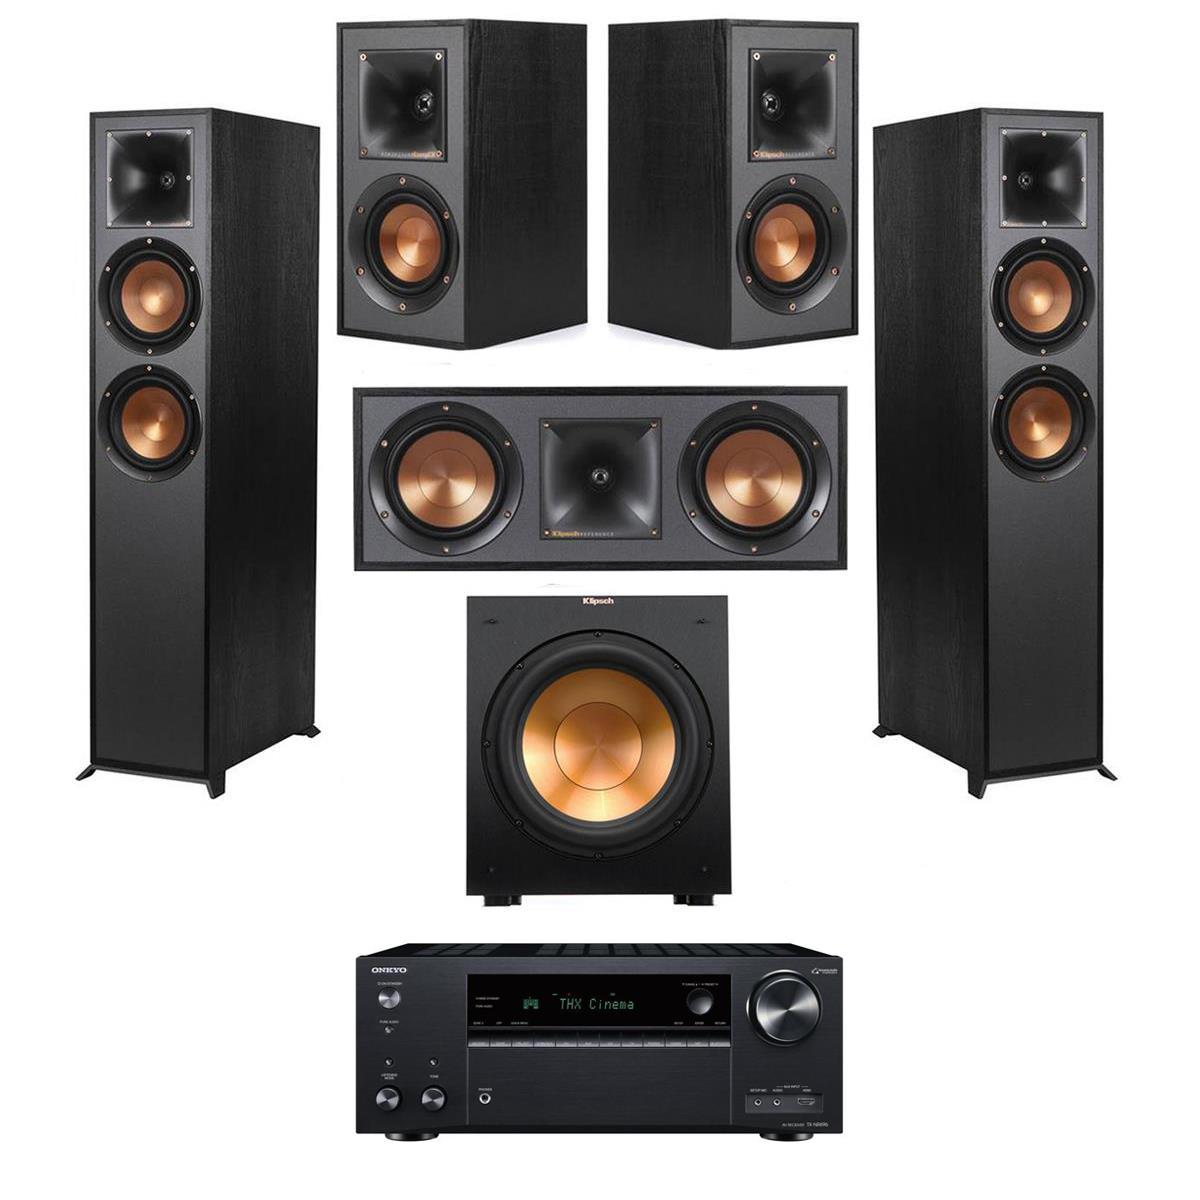 

Klipsch Reference 5.1 Home Theater System, Black w/ Denon AVR-S970H 7.2 Receiver